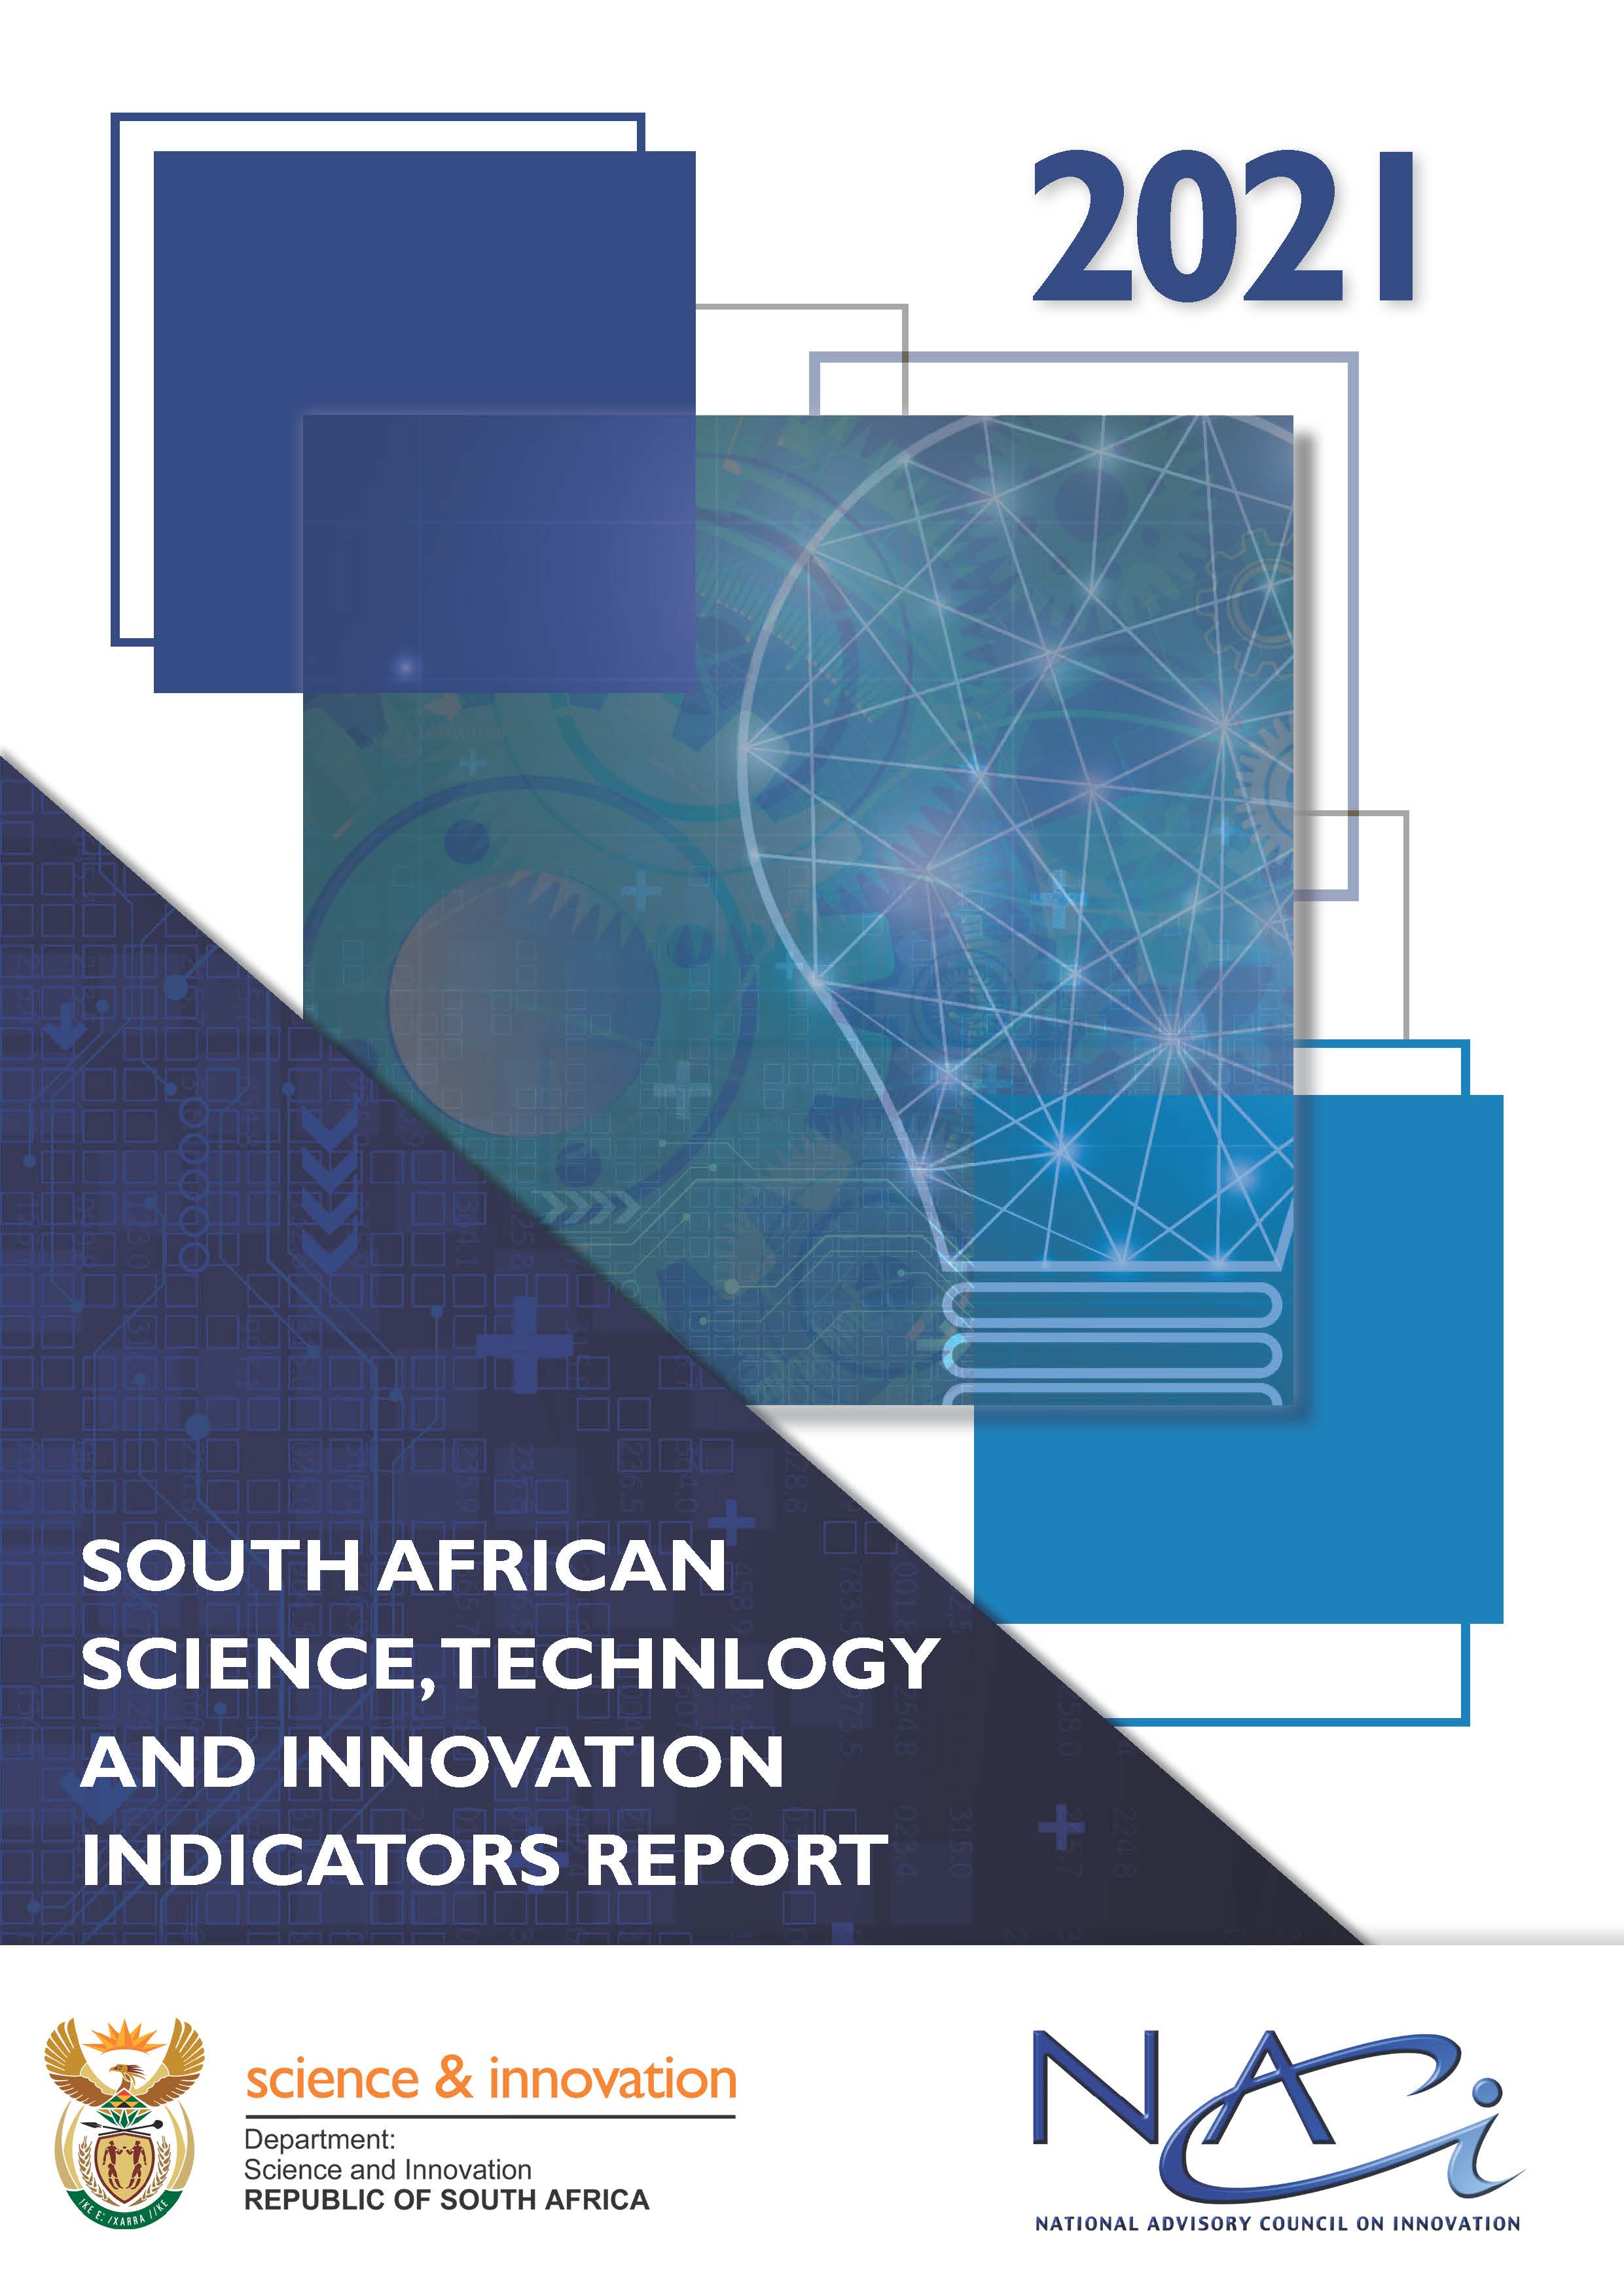 South African Science, Technology and Innovation Indicators Report 2021